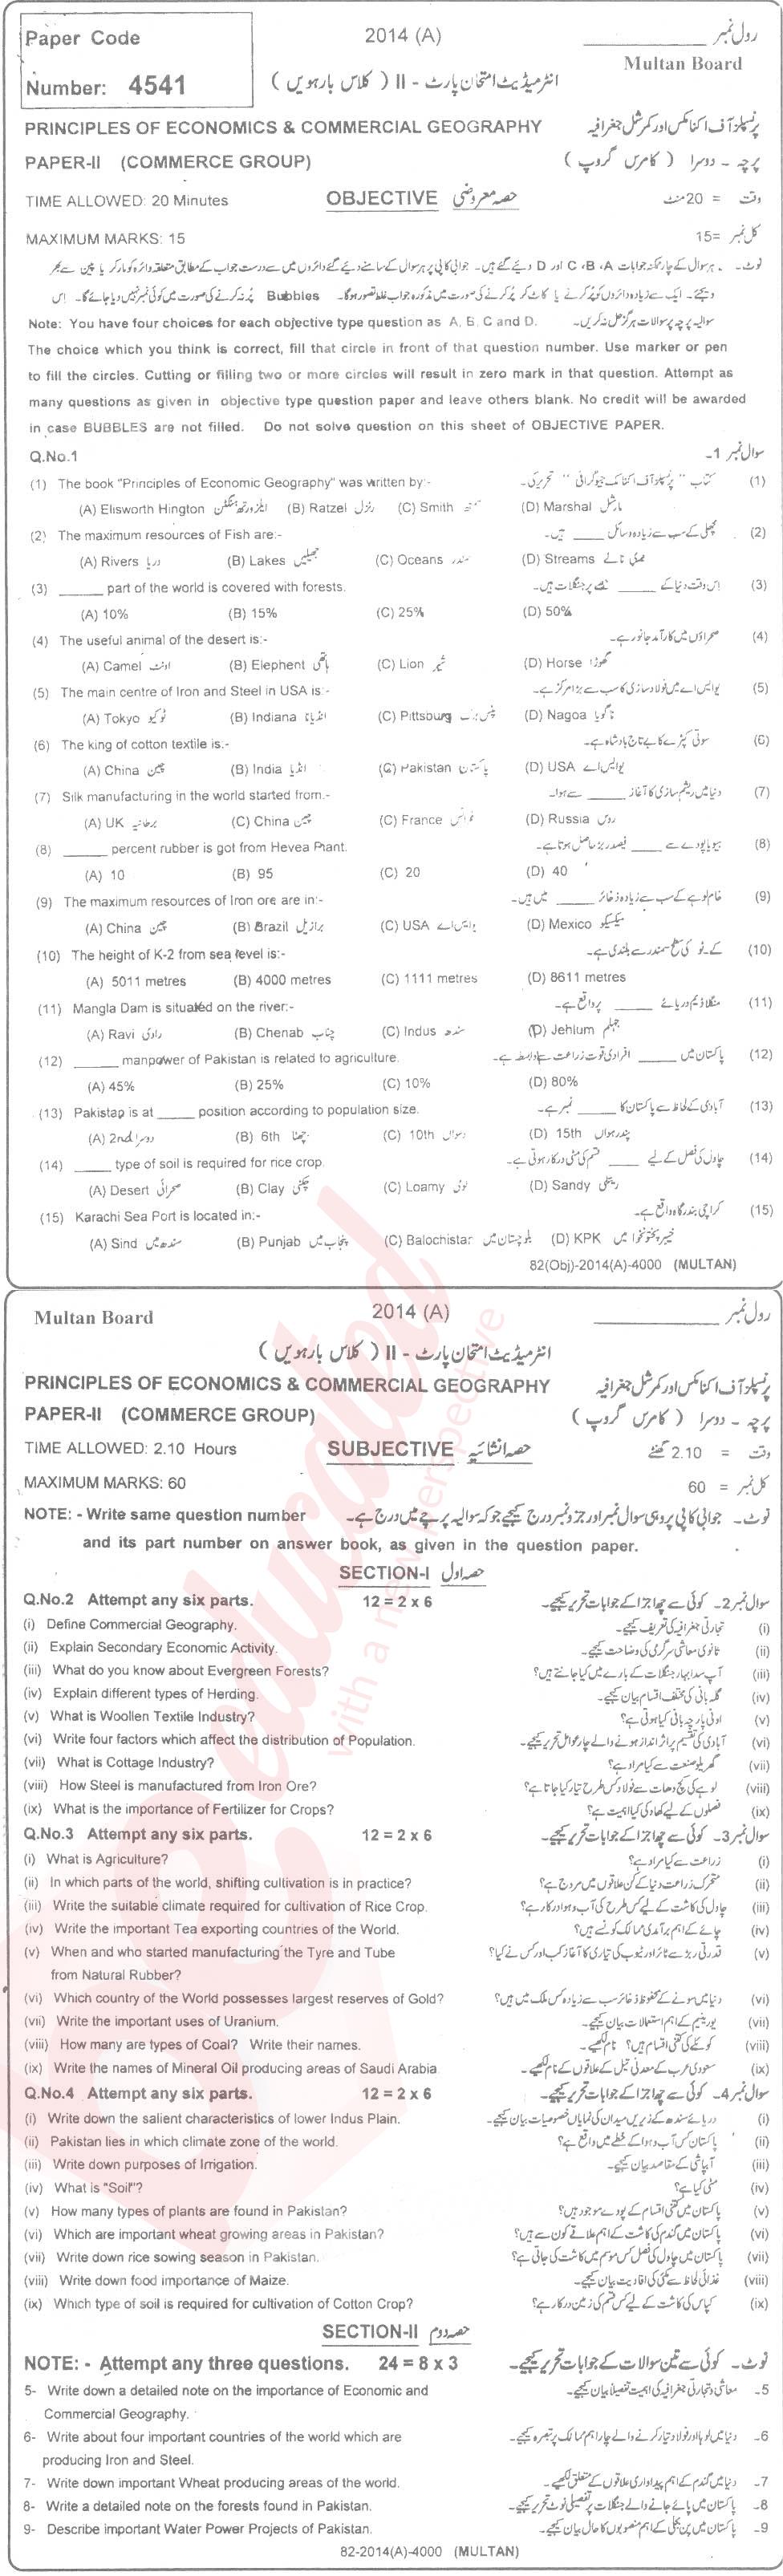 Commercial Geography ICOM Part 2 Past Paper Group 1 BISE Multan 2014